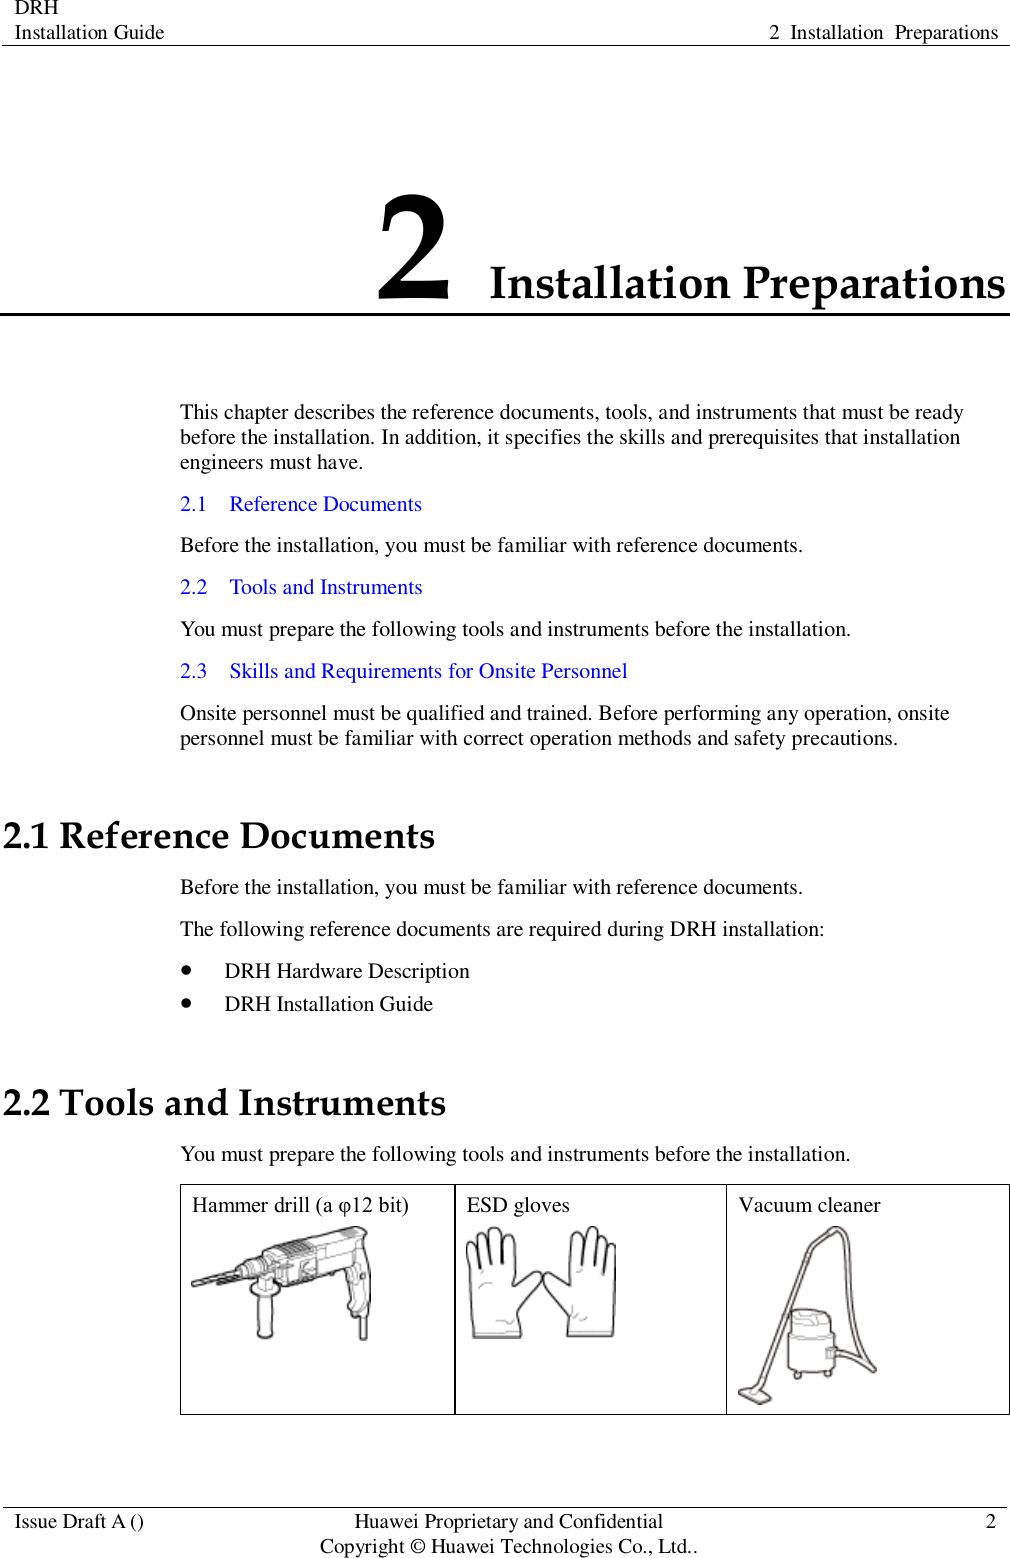 DRH   Installation Guide 2  Installation  Preparations  Issue Draft A () Huawei Proprietary and Confidential                                     Copyright © Huawei Technologies Co., Ltd.. 2  2 Installation Preparations This chapter describes the reference documents, tools, and instruments that must be ready before the installation. In addition, it specifies the skills and prerequisites that installation engineers must have. 2.1    Reference Documents Before the installation, you must be familiar with reference documents. 2.2    Tools and Instruments You must prepare the following tools and instruments before the installation. 2.3    Skills and Requirements for Onsite Personnel Onsite personnel must be qualified and trained. Before performing any operation, onsite personnel must be familiar with correct operation methods and safety precautions. 2.1 Reference Documents Before the installation, you must be familiar with reference documents. The following reference documents are required during DRH installation:  DRH Hardware Description  DRH Installation Guide 2.2 Tools and Instruments You must prepare the following tools and instruments before the installation. Hammer drill (a φ12 bit)  ESD gloves  Vacuum cleaner  